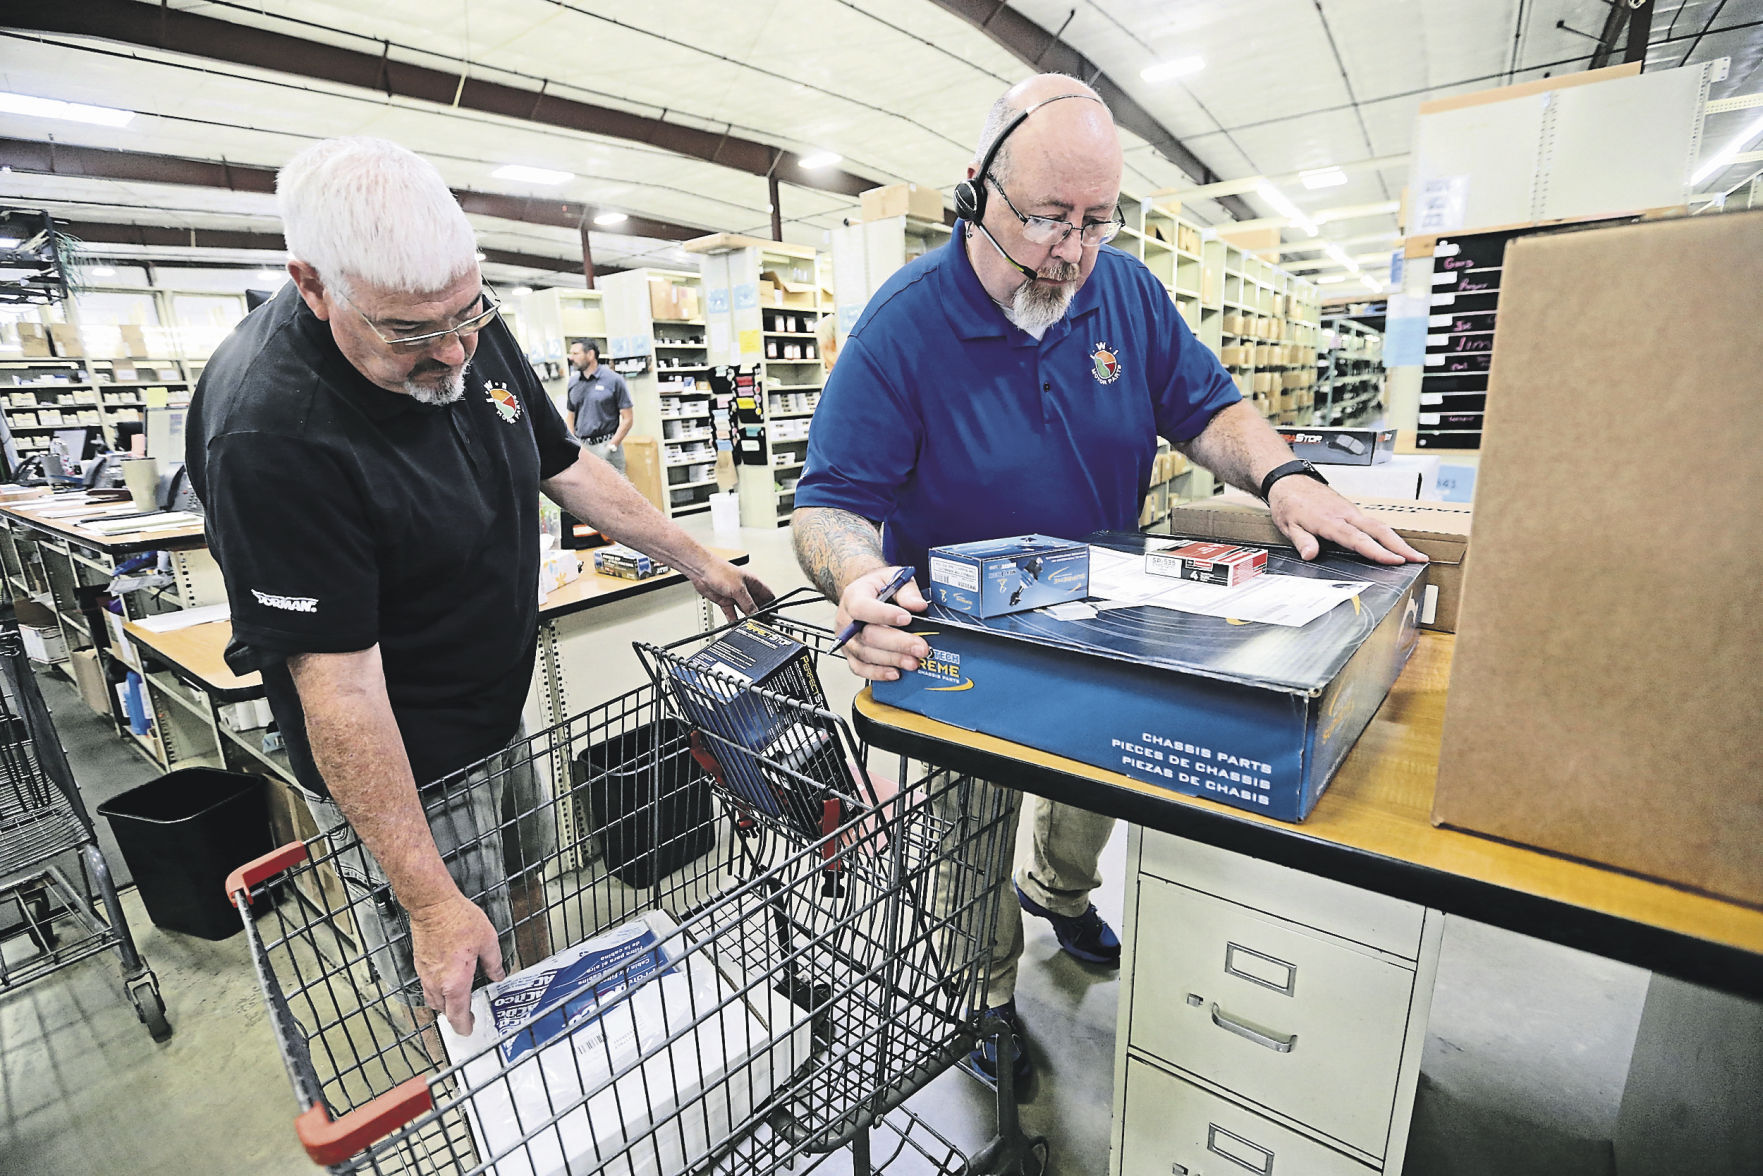 Gary McFadden (left) and Tom Robinett prepare an order at IWI Motor Parts. The automotive part wholesale distribution company, based in Dubuque, has 14 locations and more than 250 employees. IWI was started by Mike Faley in 1962.    PHOTO CREDIT: JESSICA REILLY